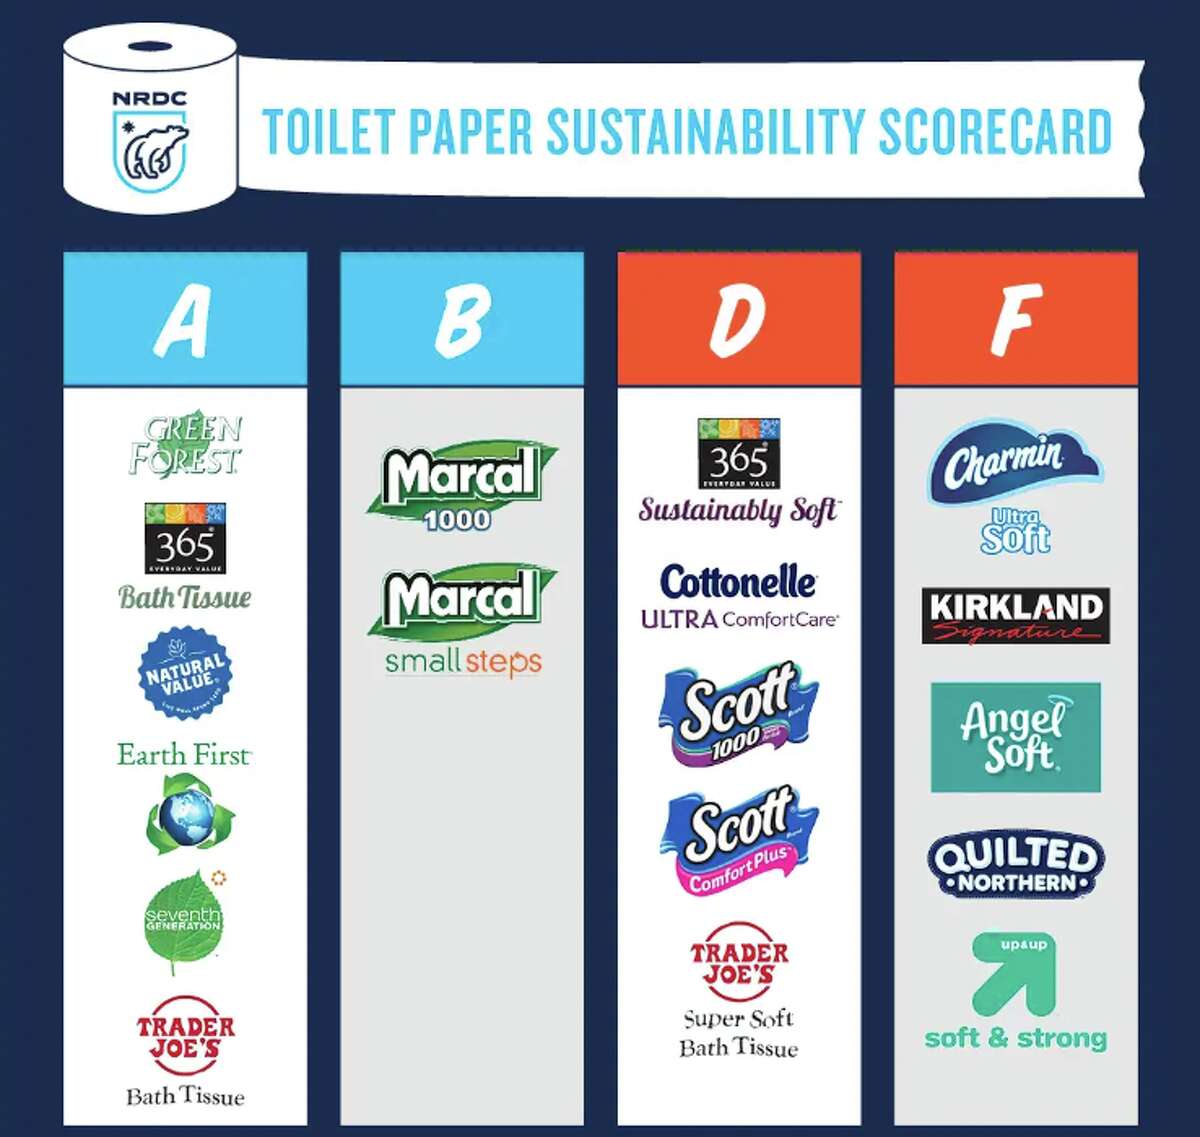 A recent report by the Natural Resources Defense Council (NRDC) and Stand.earth graded toilet paper in sustainability. Some of the most popular brands received F's.